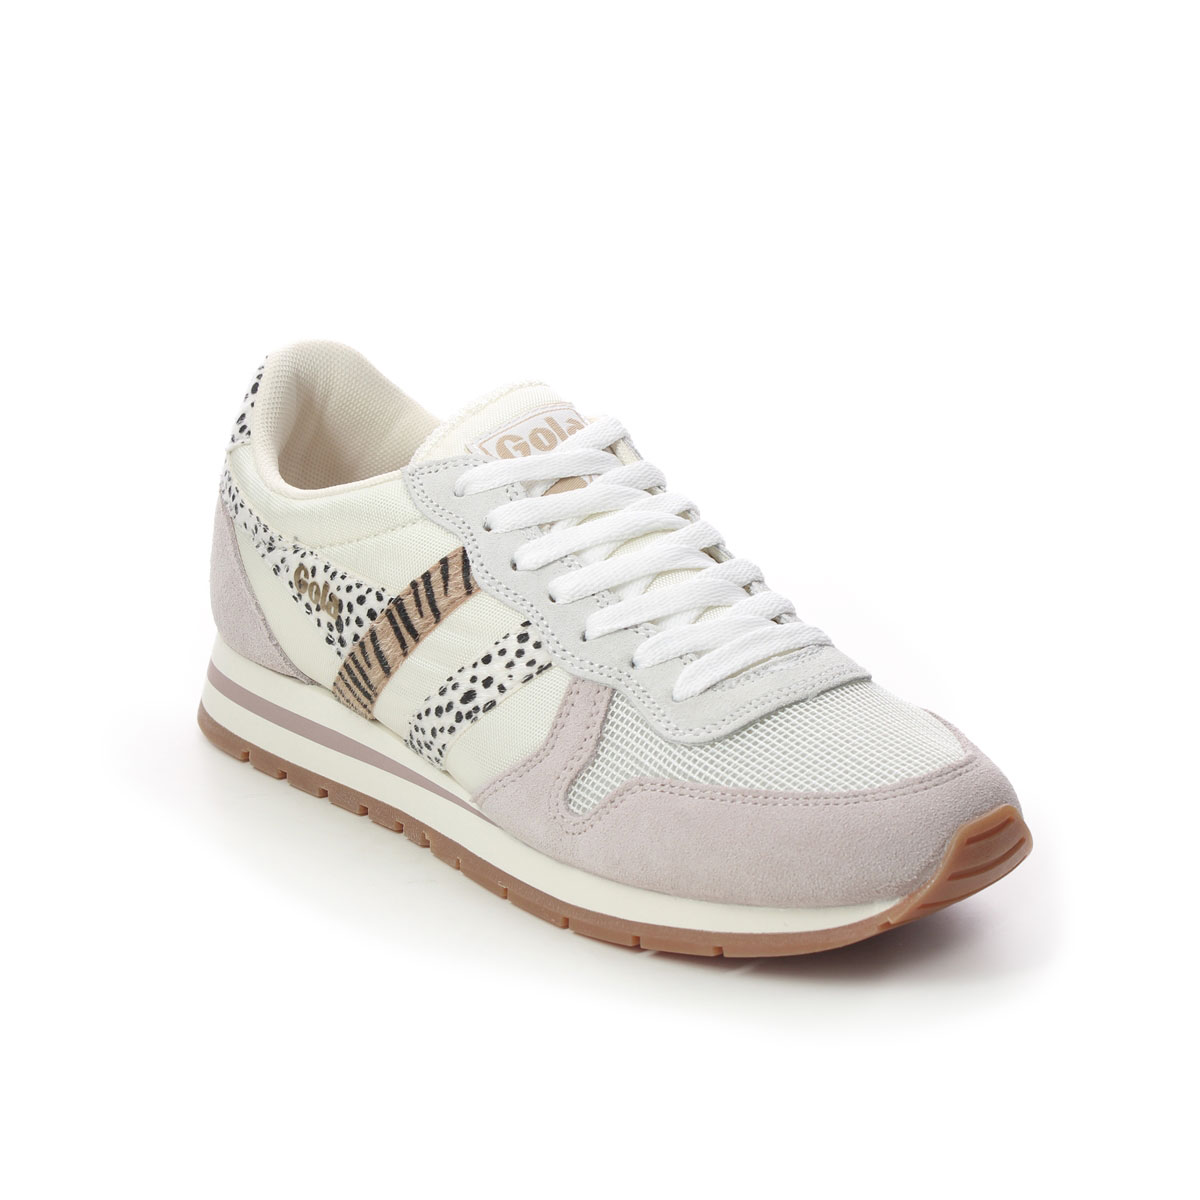 Gola Daytona Safari White Pink Womens trainers CLB019-WK in a Plain Leather and Man-made in Size 4